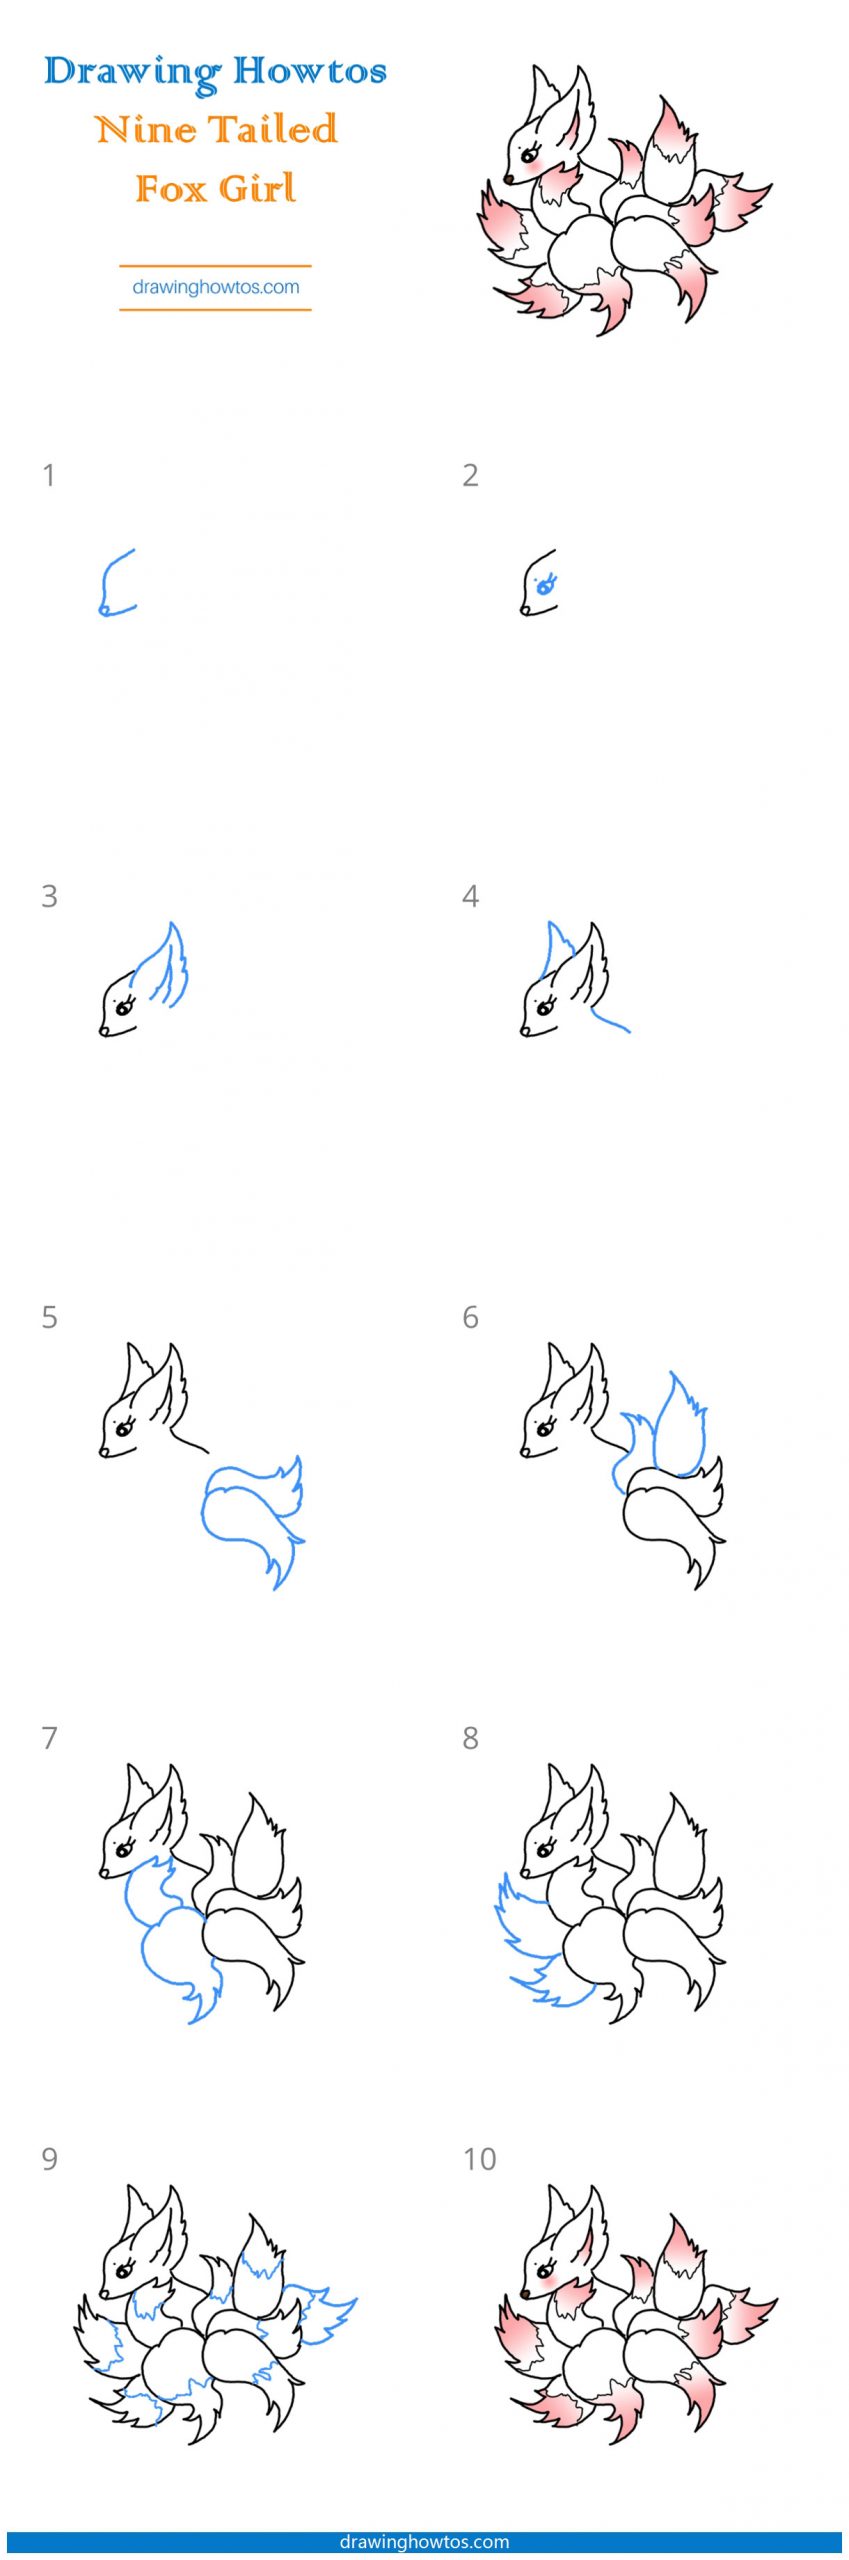 How to Draw a Nine-tailed Fox Step by Step